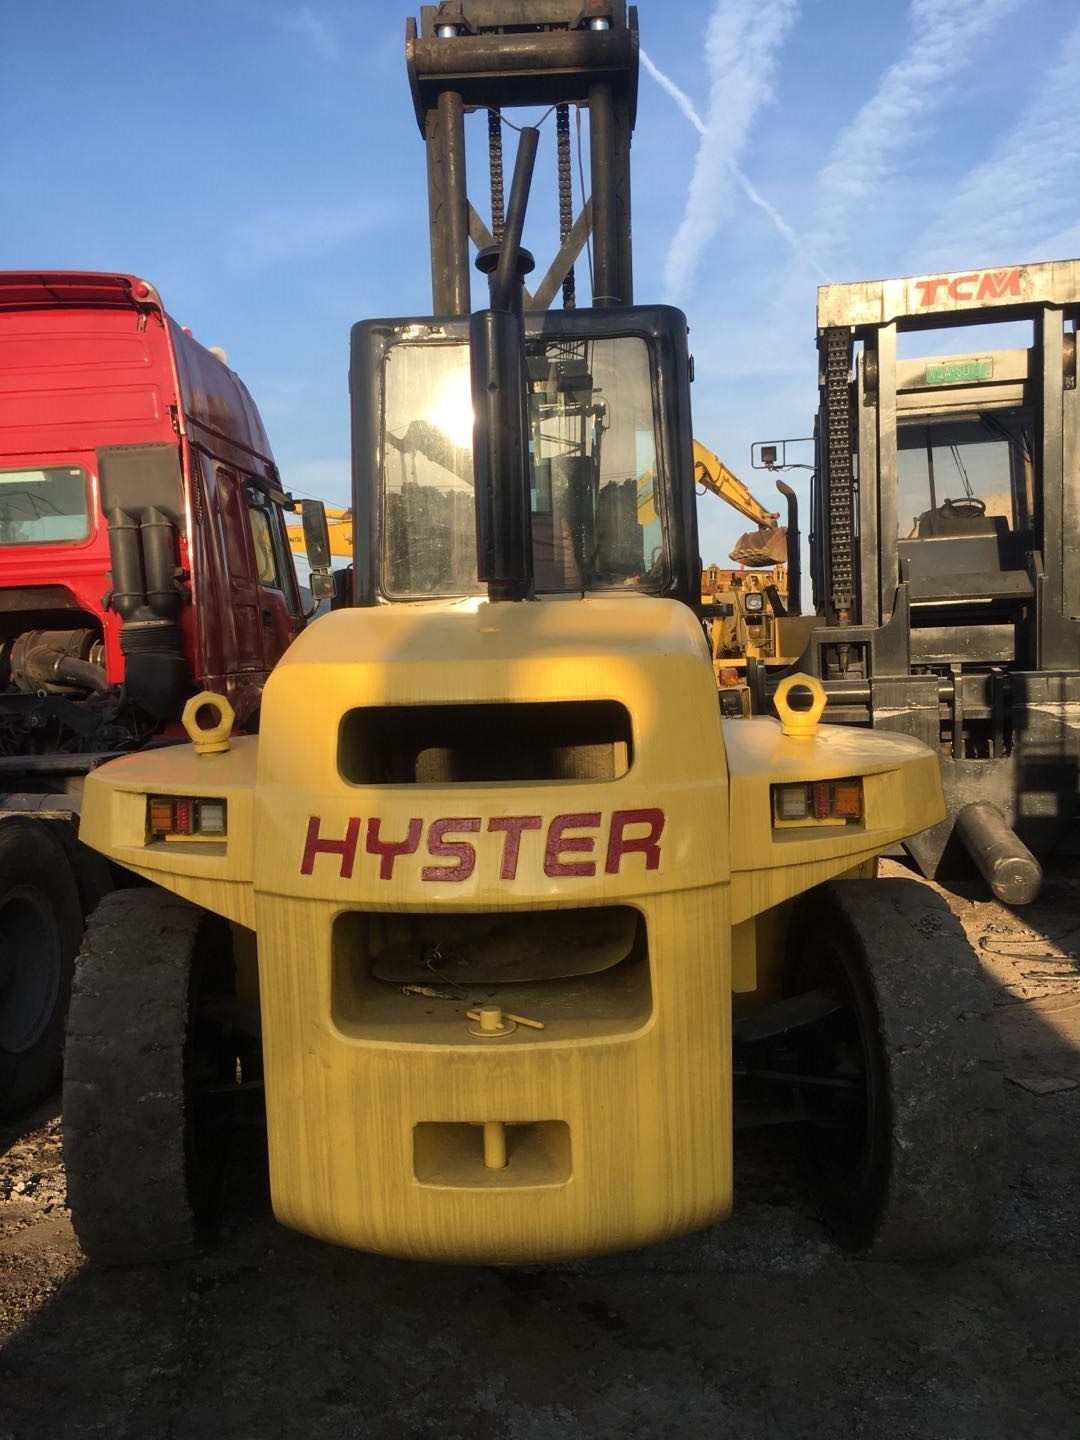 Used Hyster 16t Forklift in Very Good Working Condition